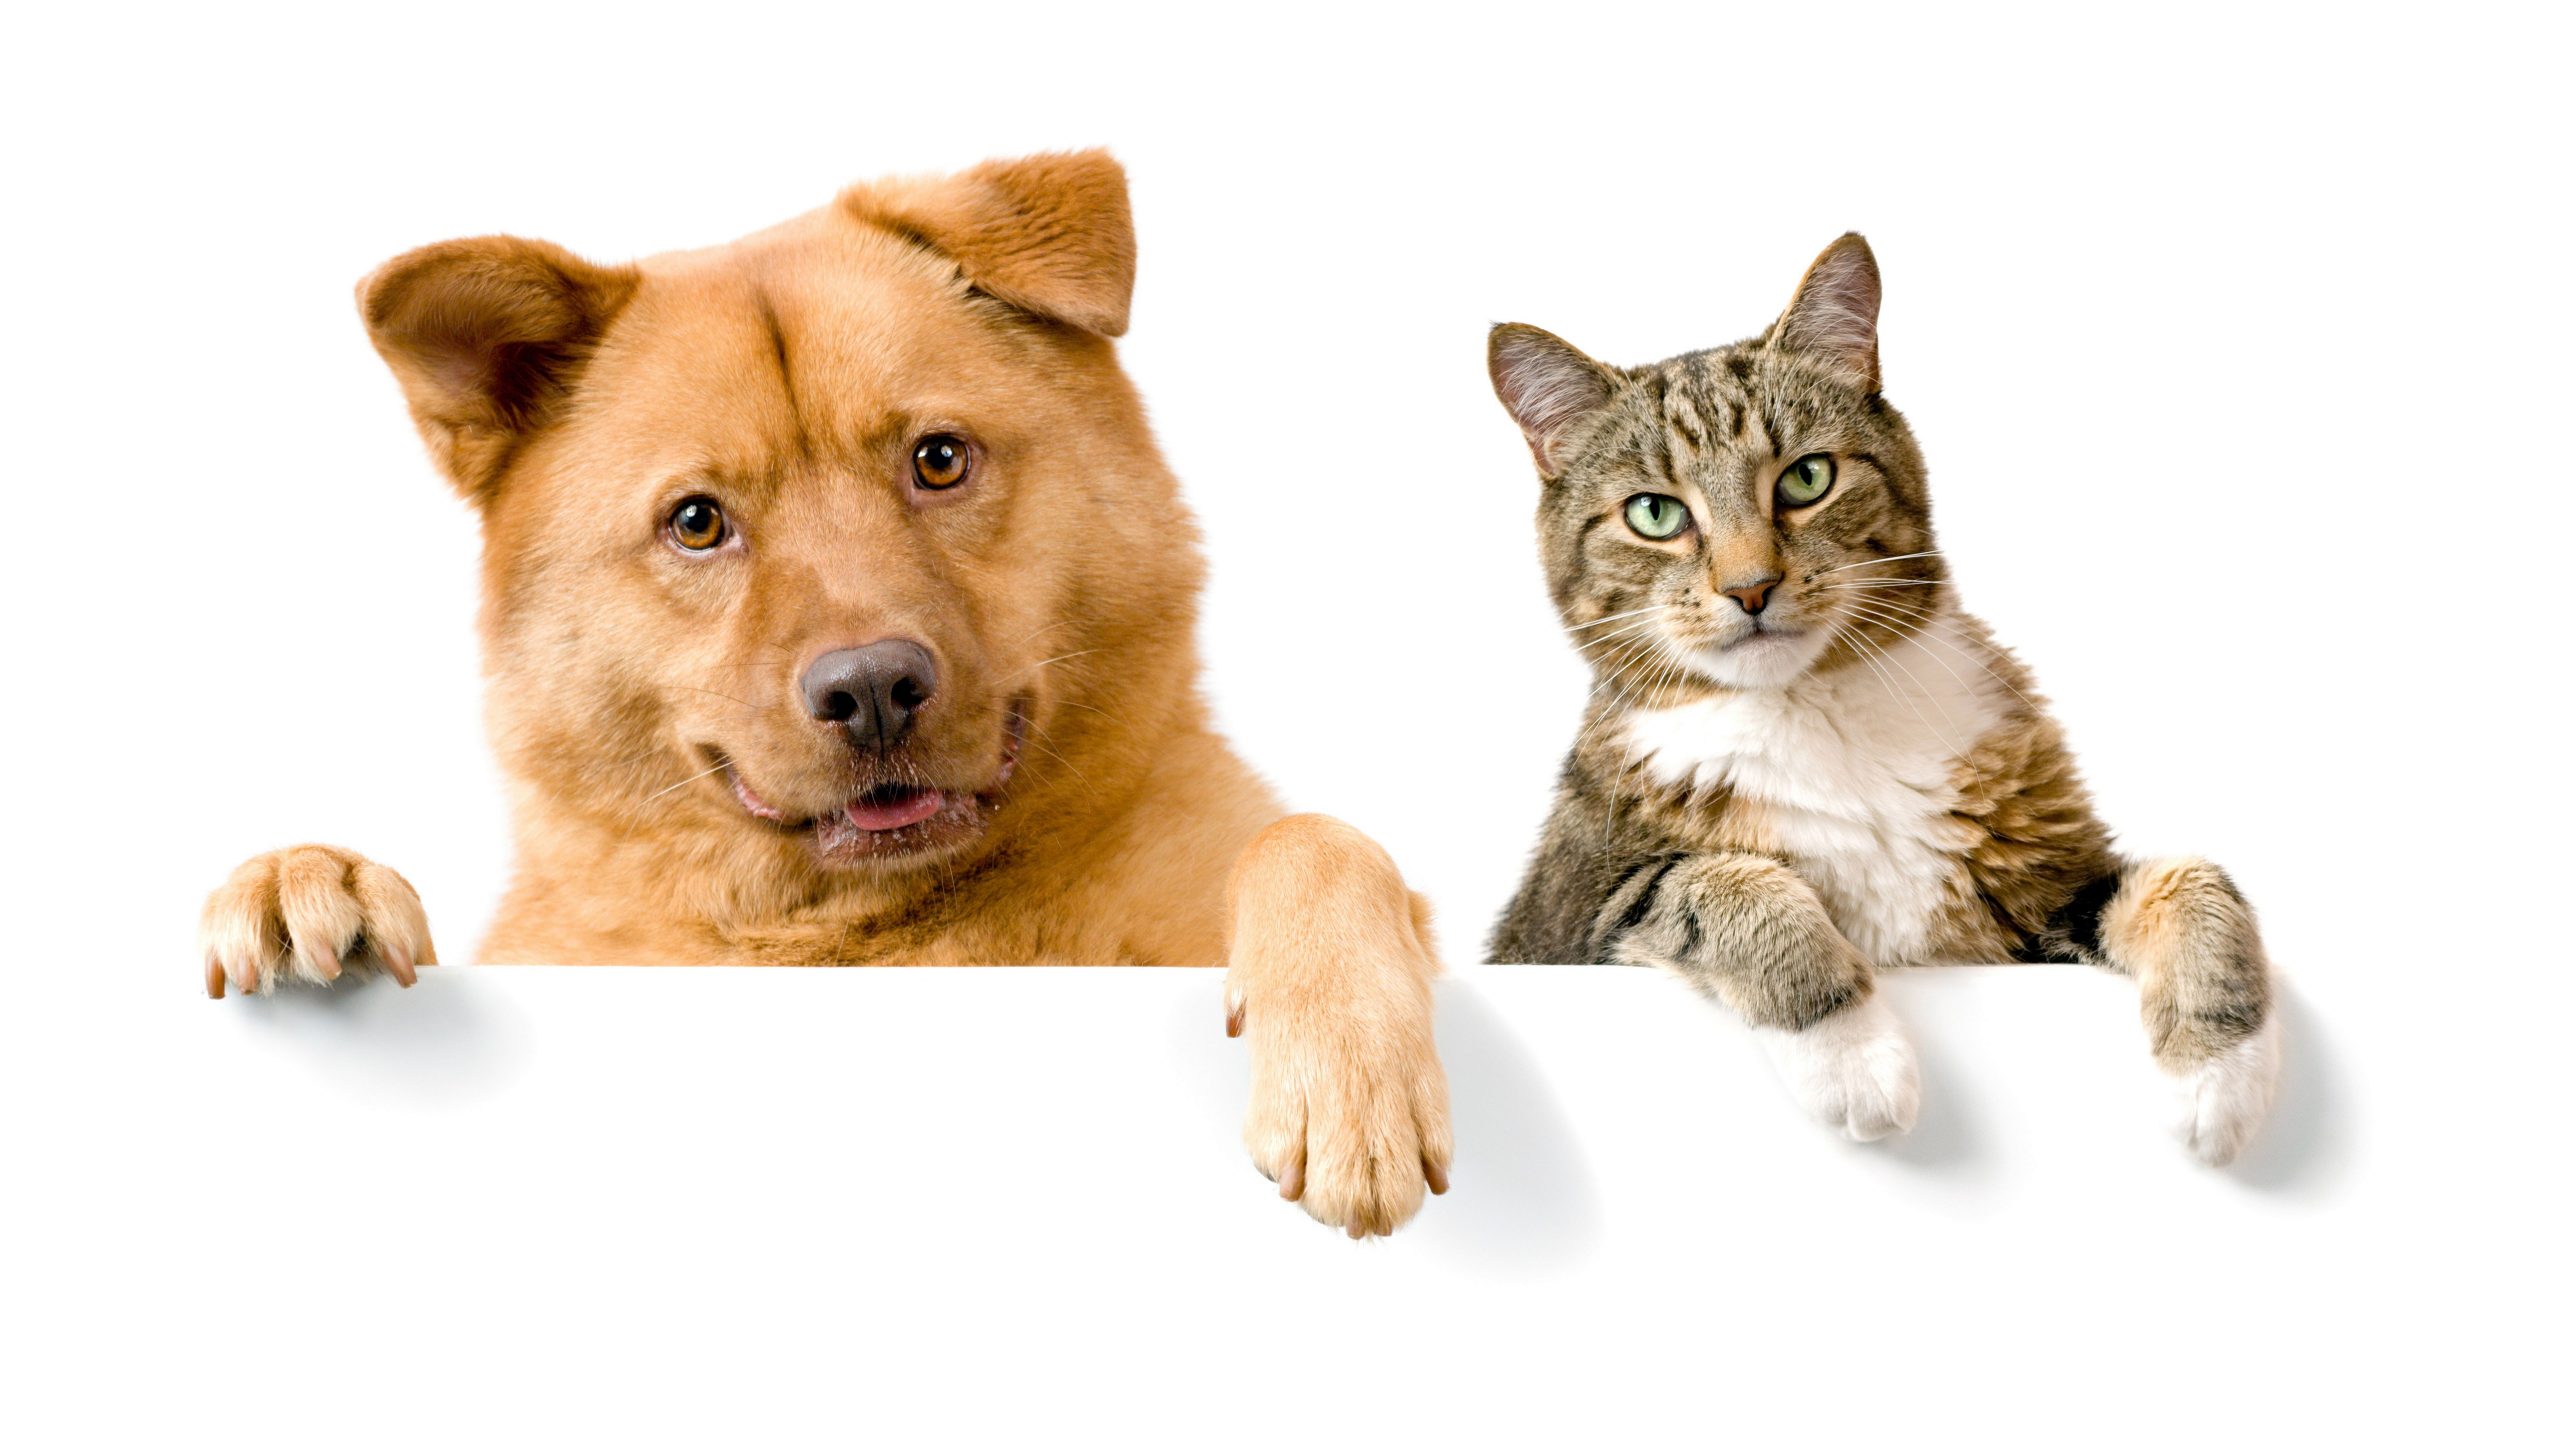 Funny wallpaper of dogs and cat together, pets, animal, domestic